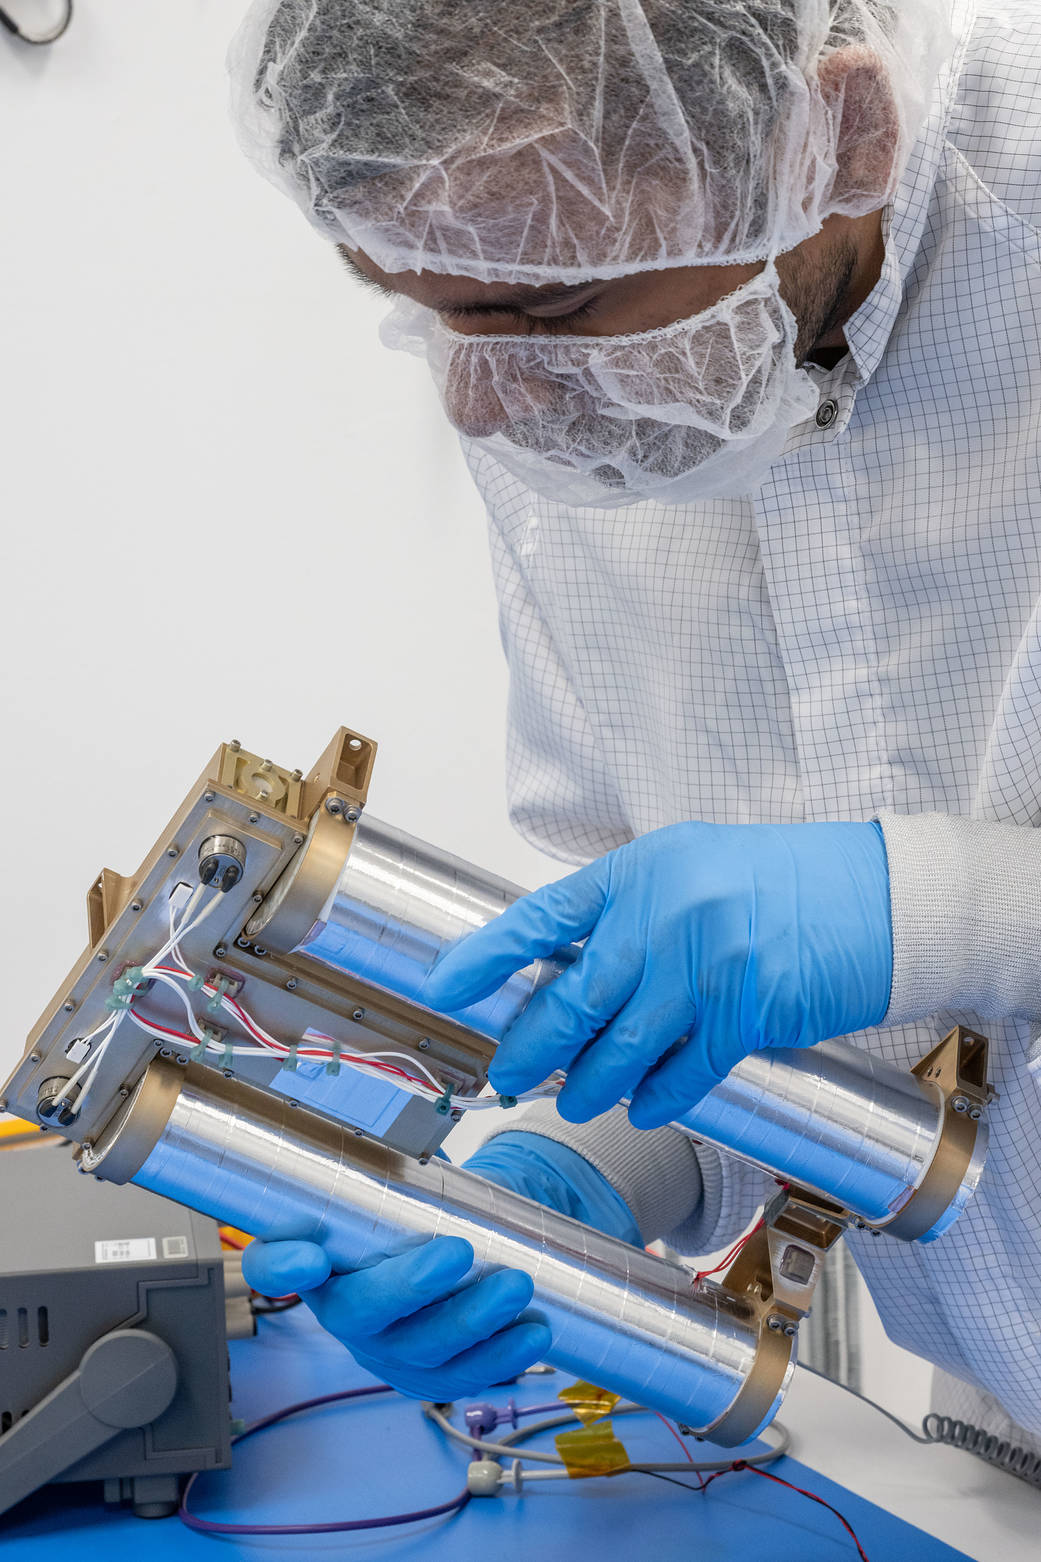 A person with blue gloves, a lab suit, and mask is holding a device. The device has two cylinders connected together.